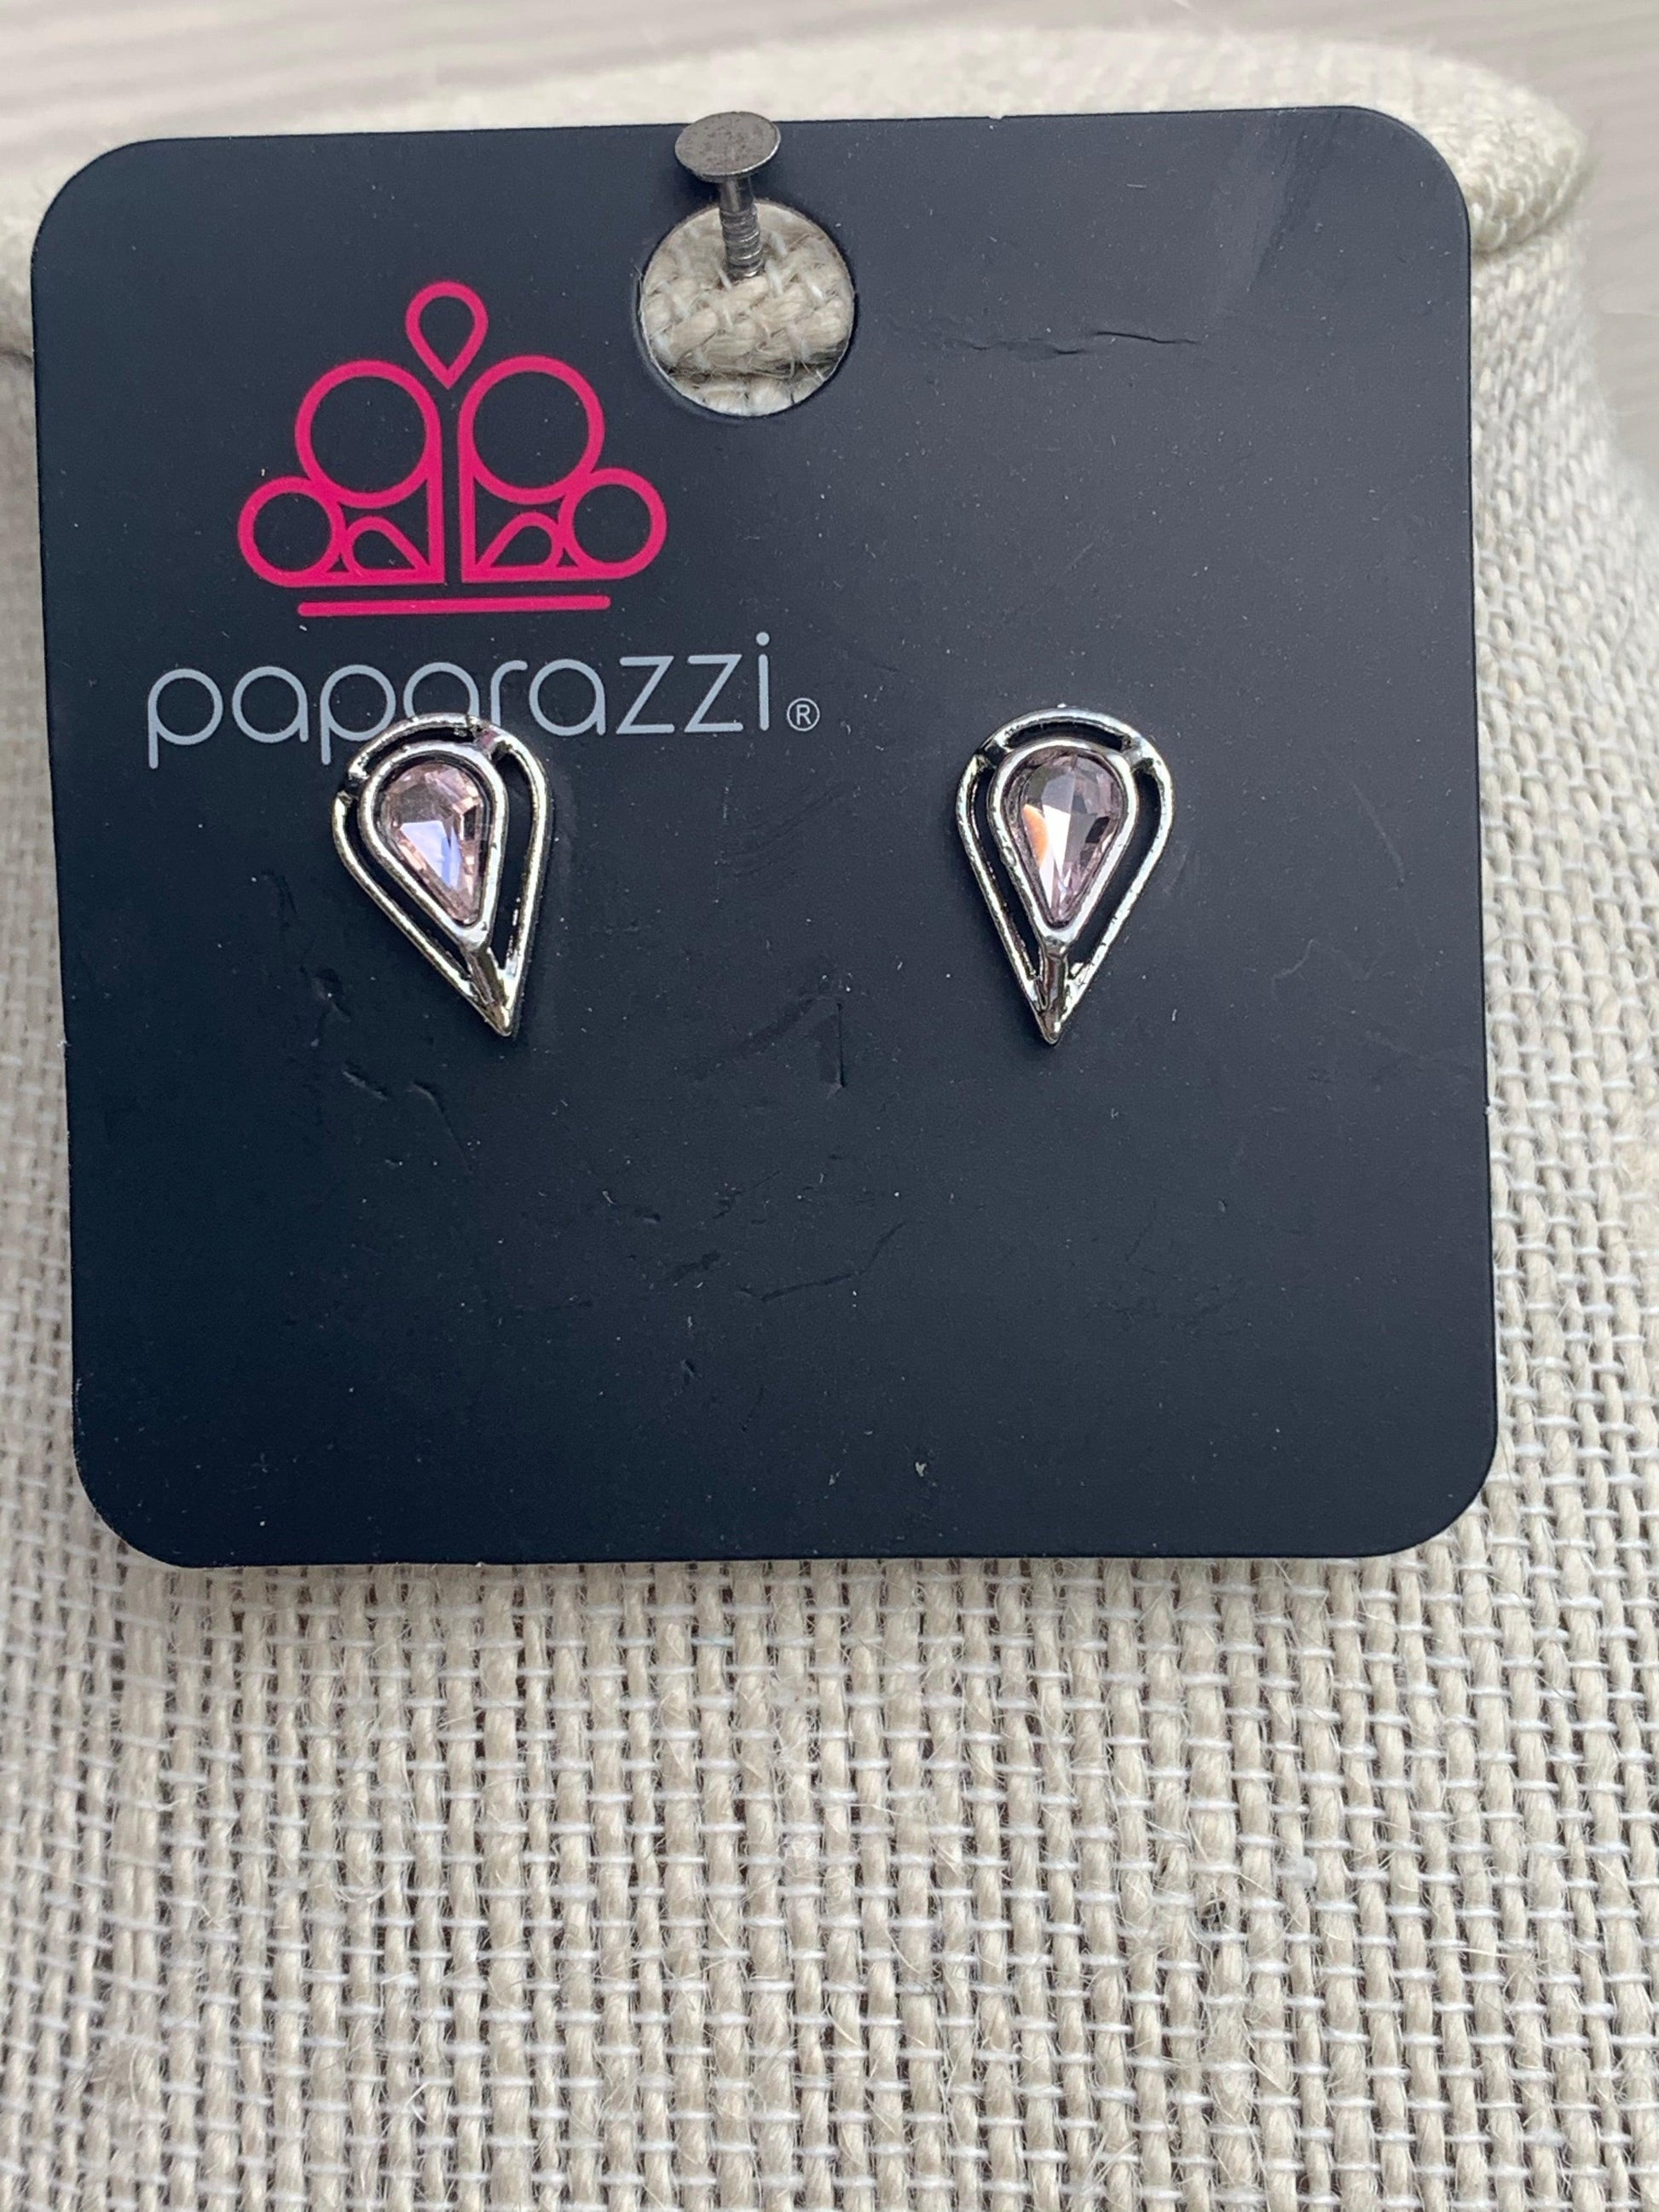 Paparazzi Accessories Starlet Shimmer Earrings: #4 - Light Pink Light Pink Earrings ONLY *Color Not Shown Jewelry